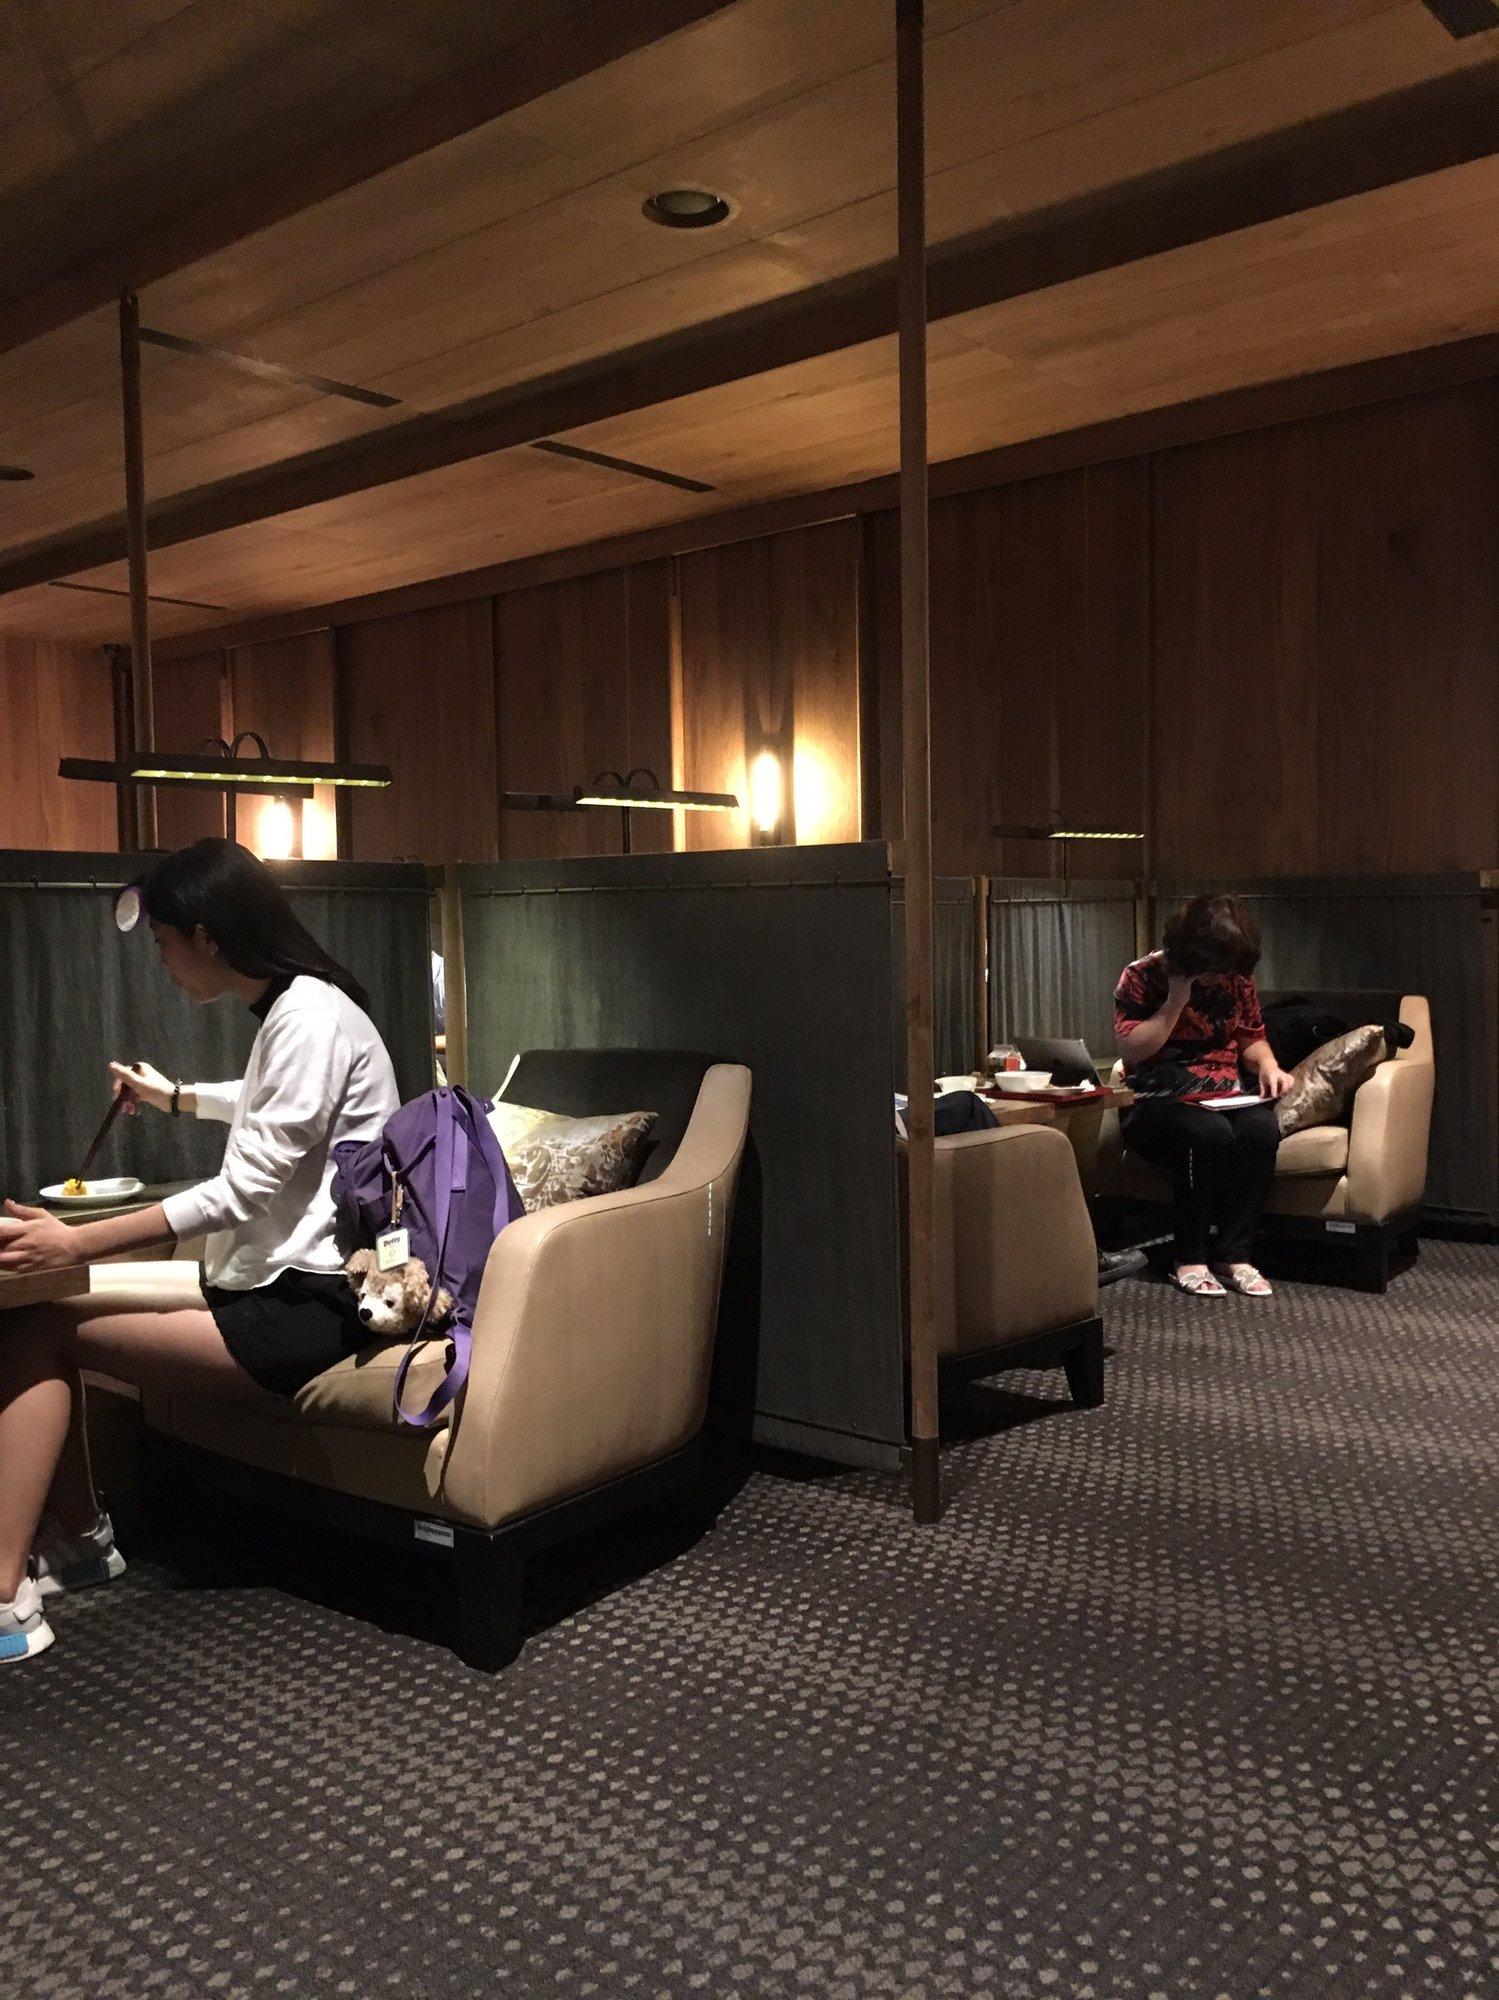 China Airlines Lounge (V1) image 23 of 44